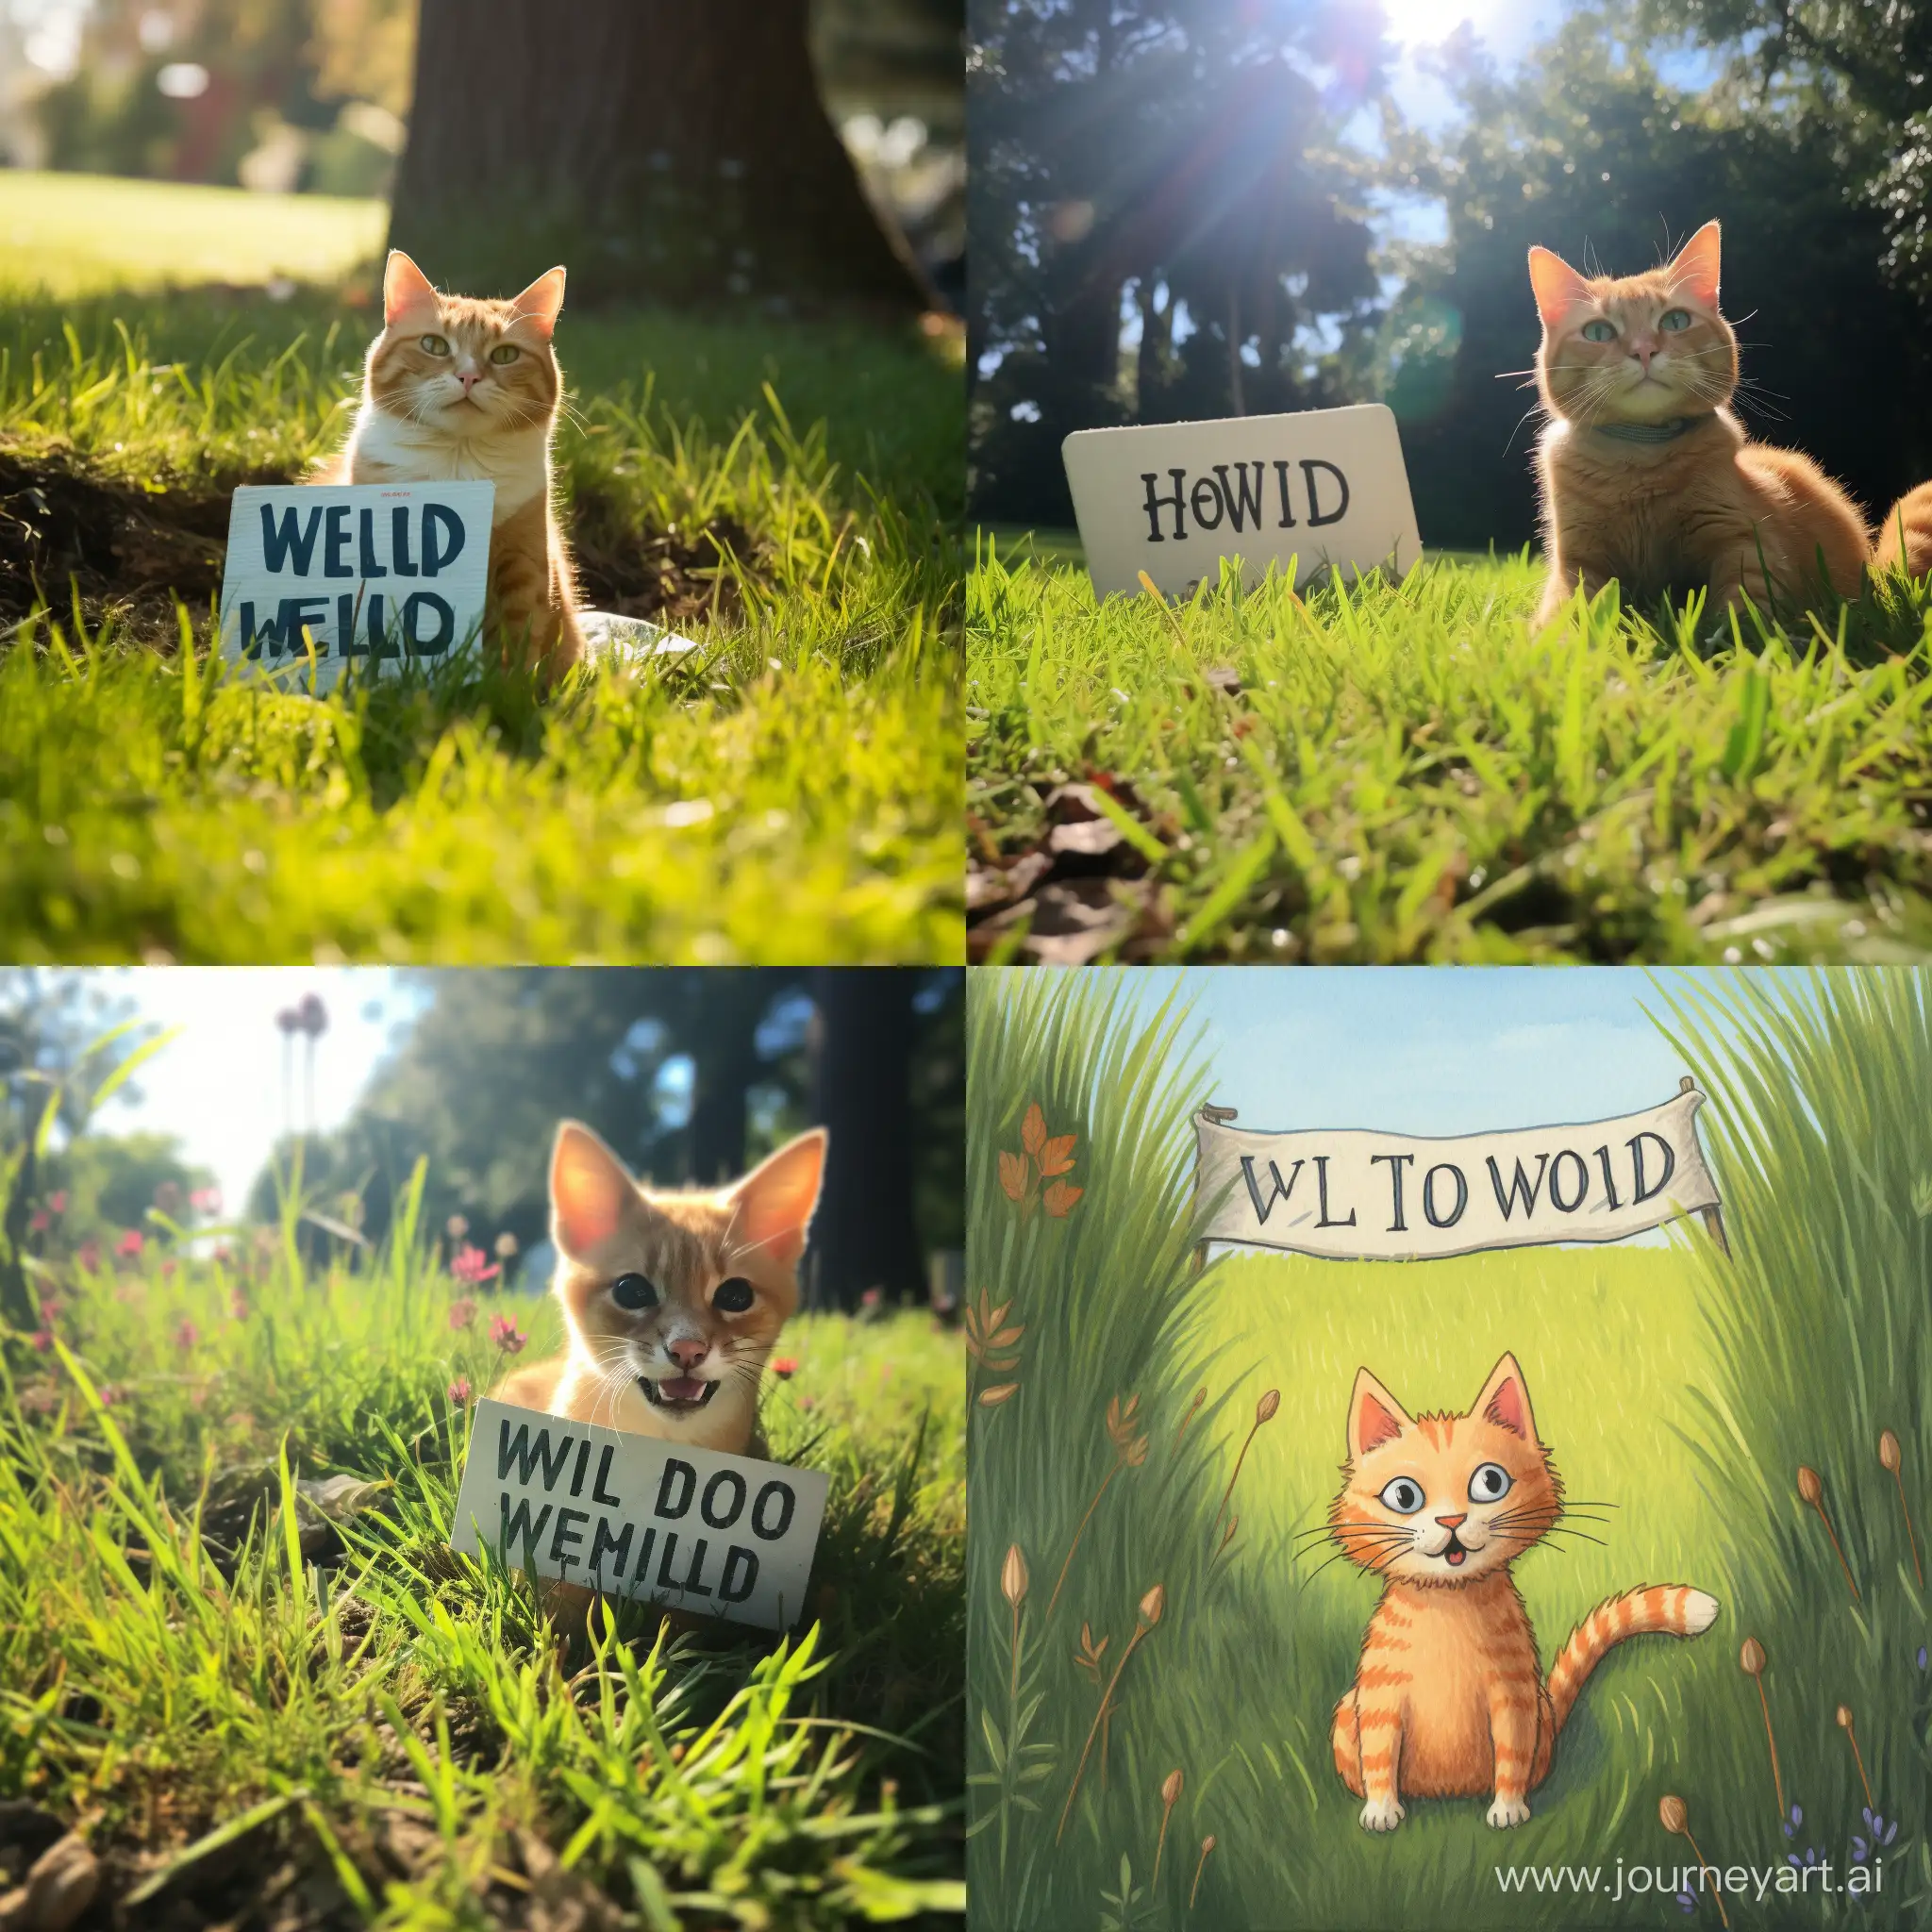 Friendly-Orange-Tabby-Cat-Greeting-with-Hello-World-Sign-on-Lush-Green-Grass